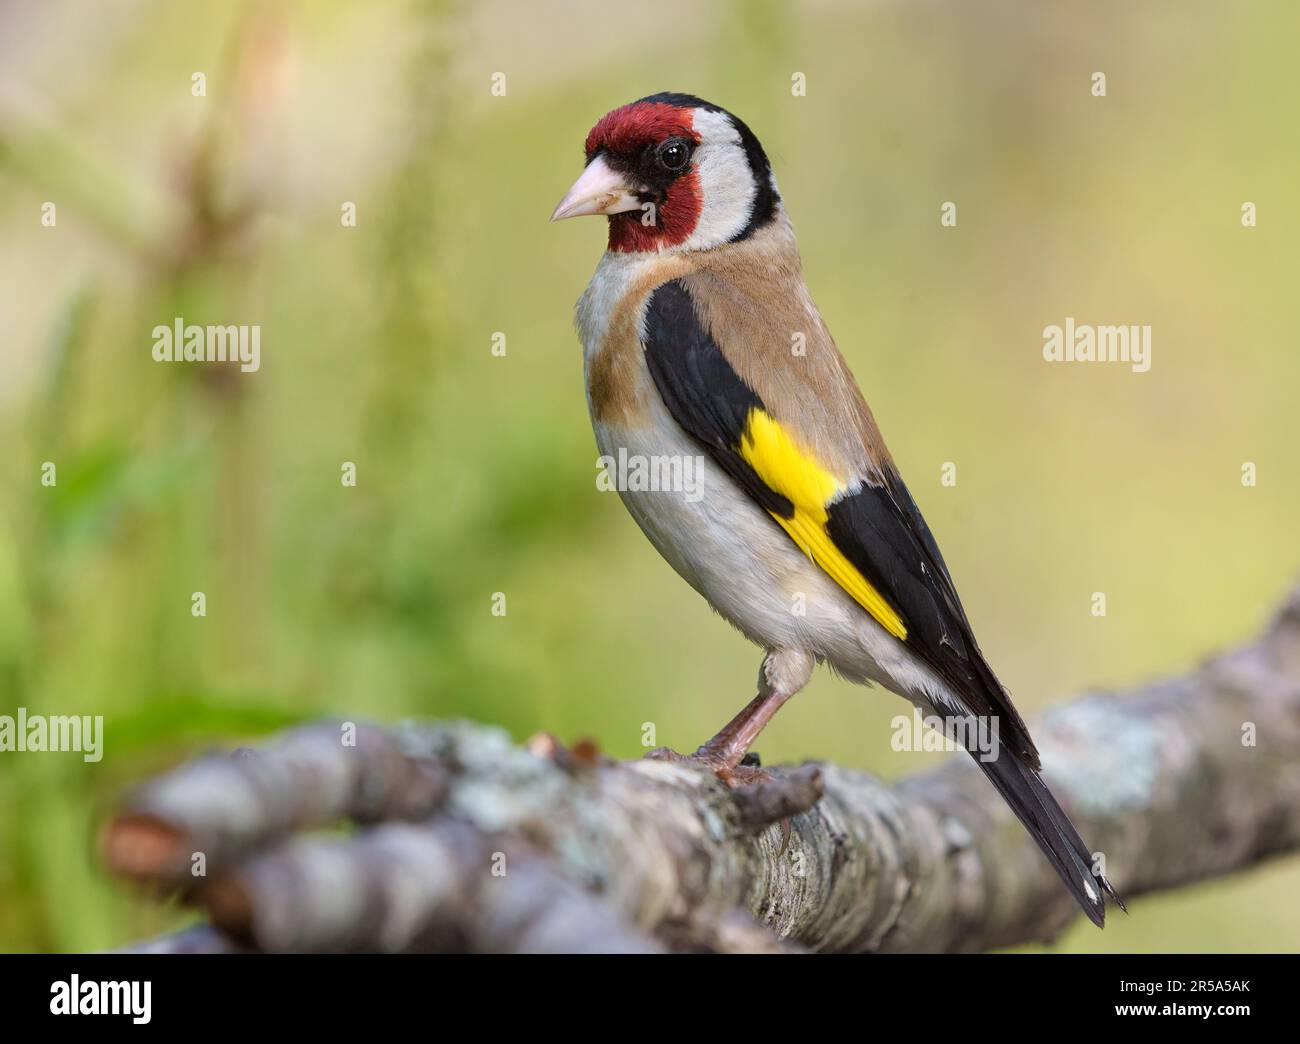 European goldfinch (Carduelis carduelis) perched on lichen covered branch in full plumage beauty Stock Photo